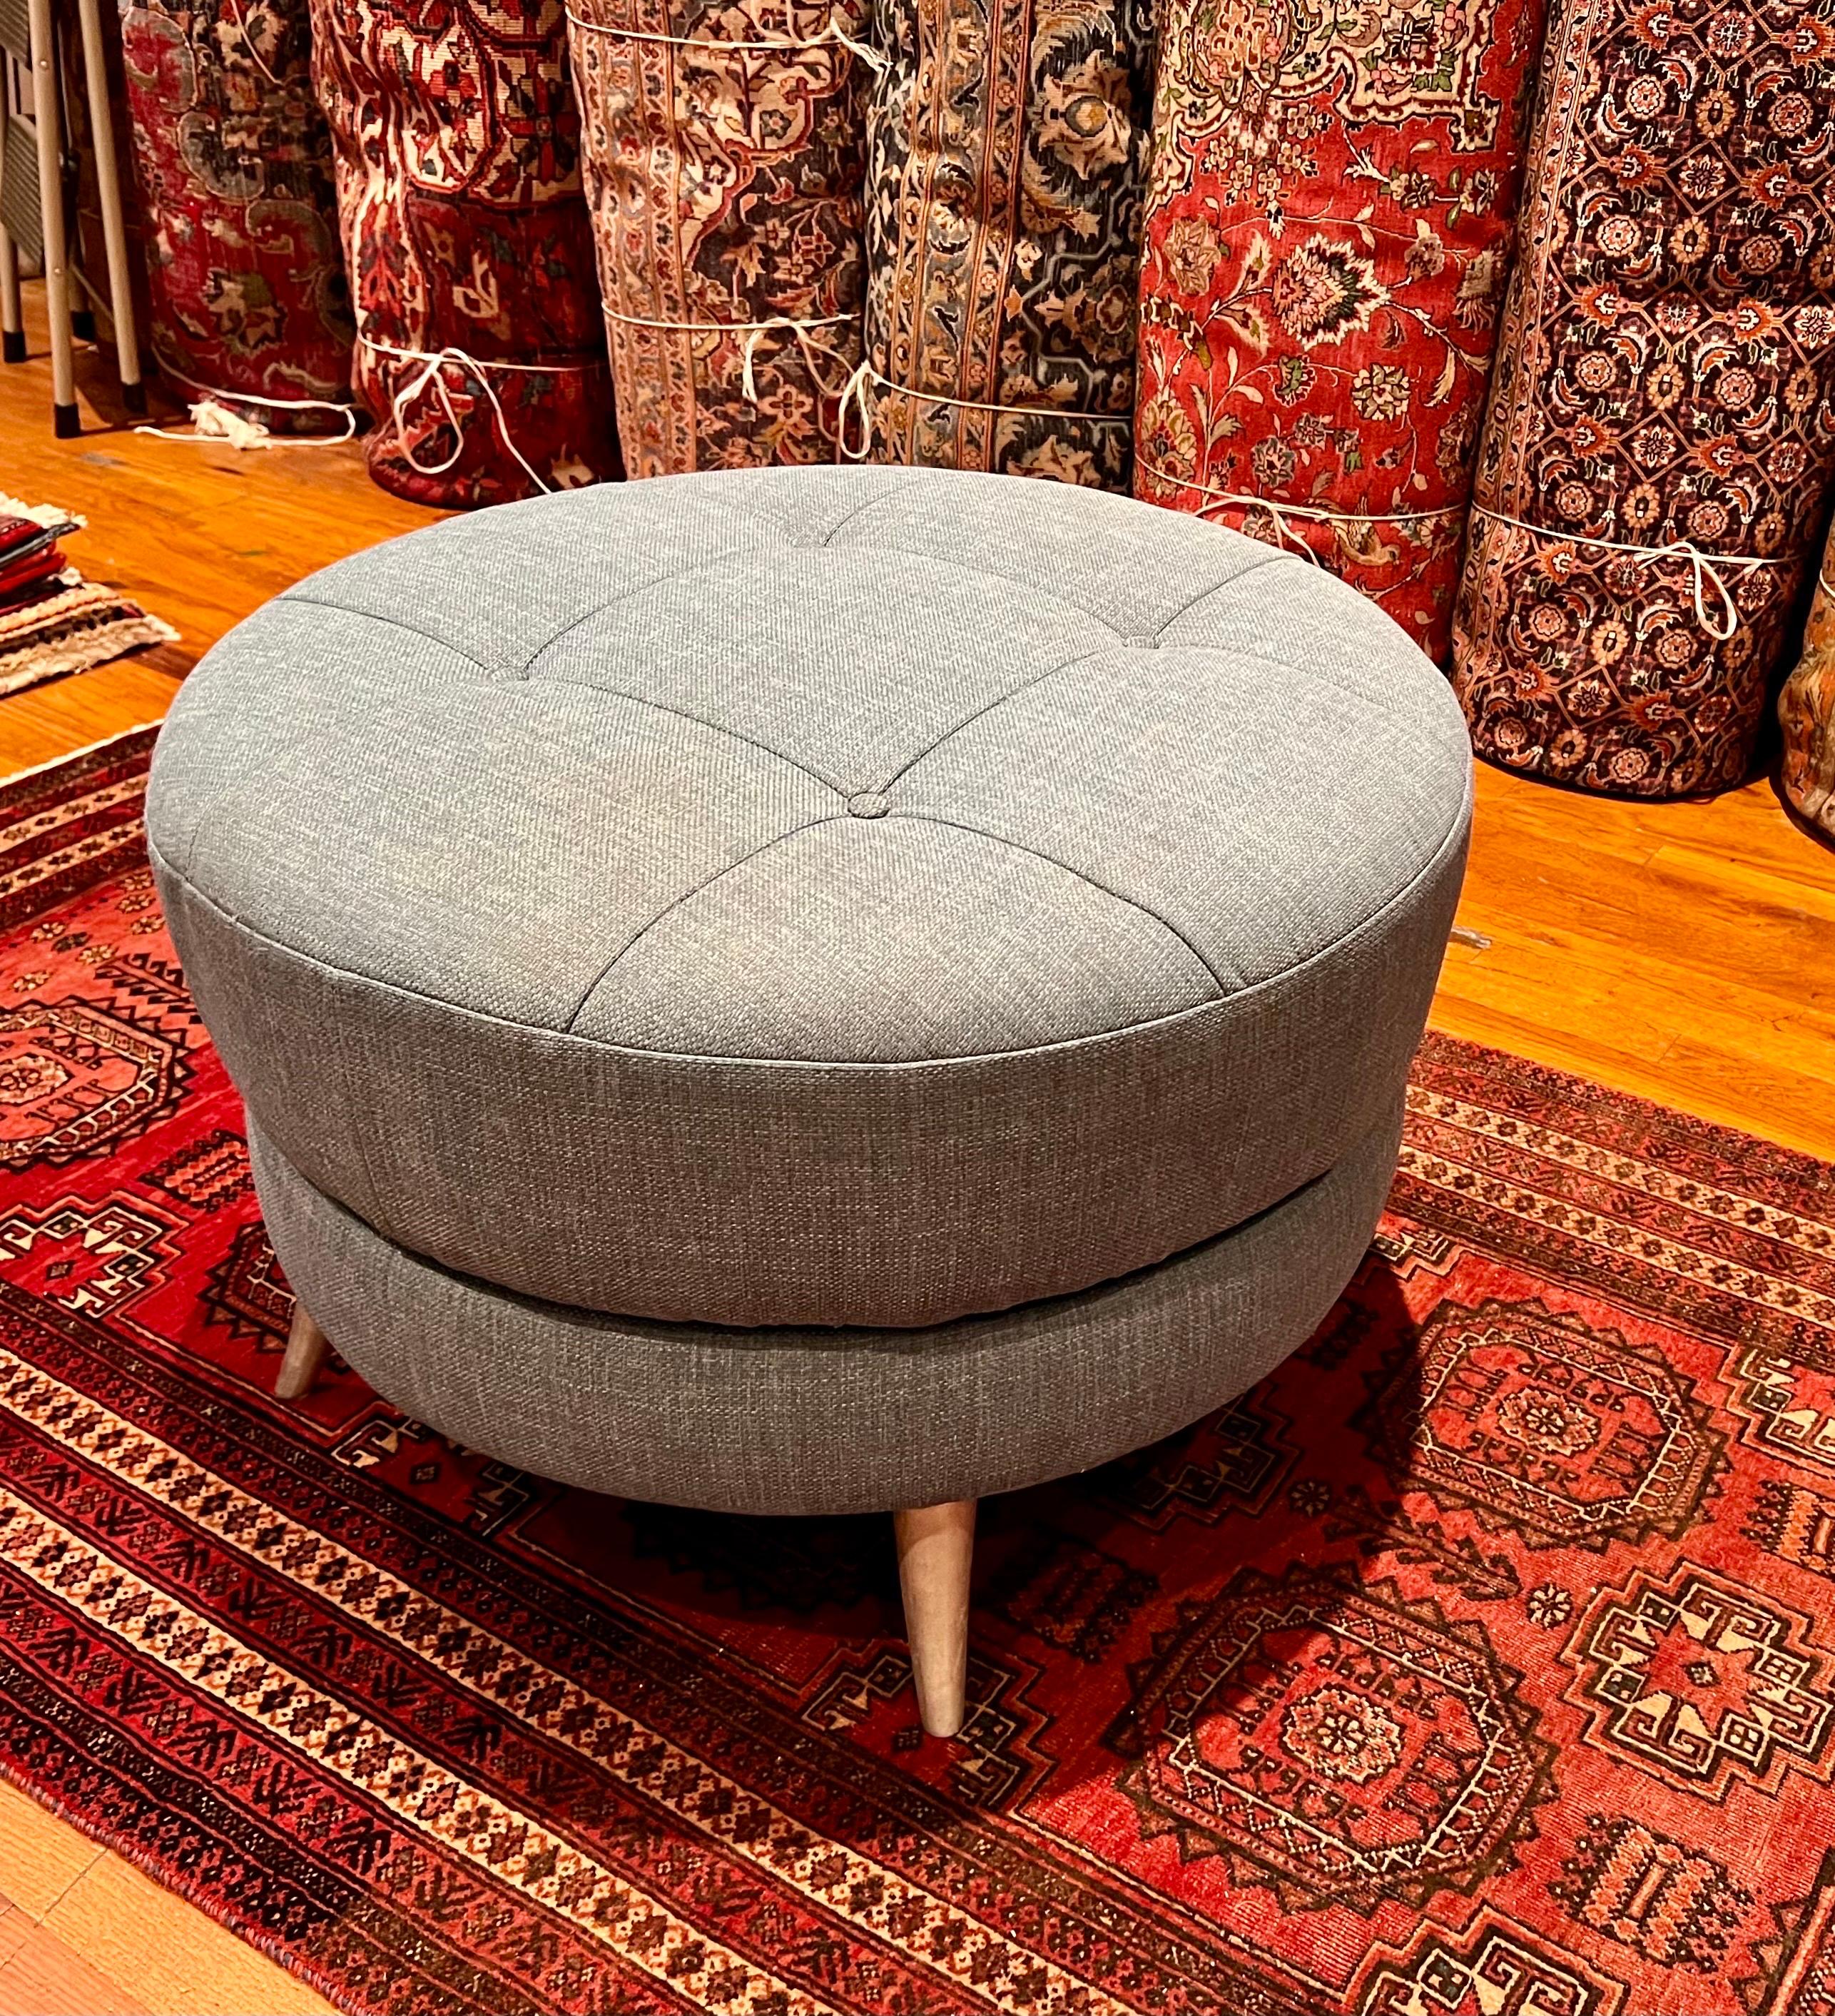 American Mid-Century Modern large swivel round ottoman with Horn style brushed steel legs nice and clean upholstery in light blue fabric by Knoll.